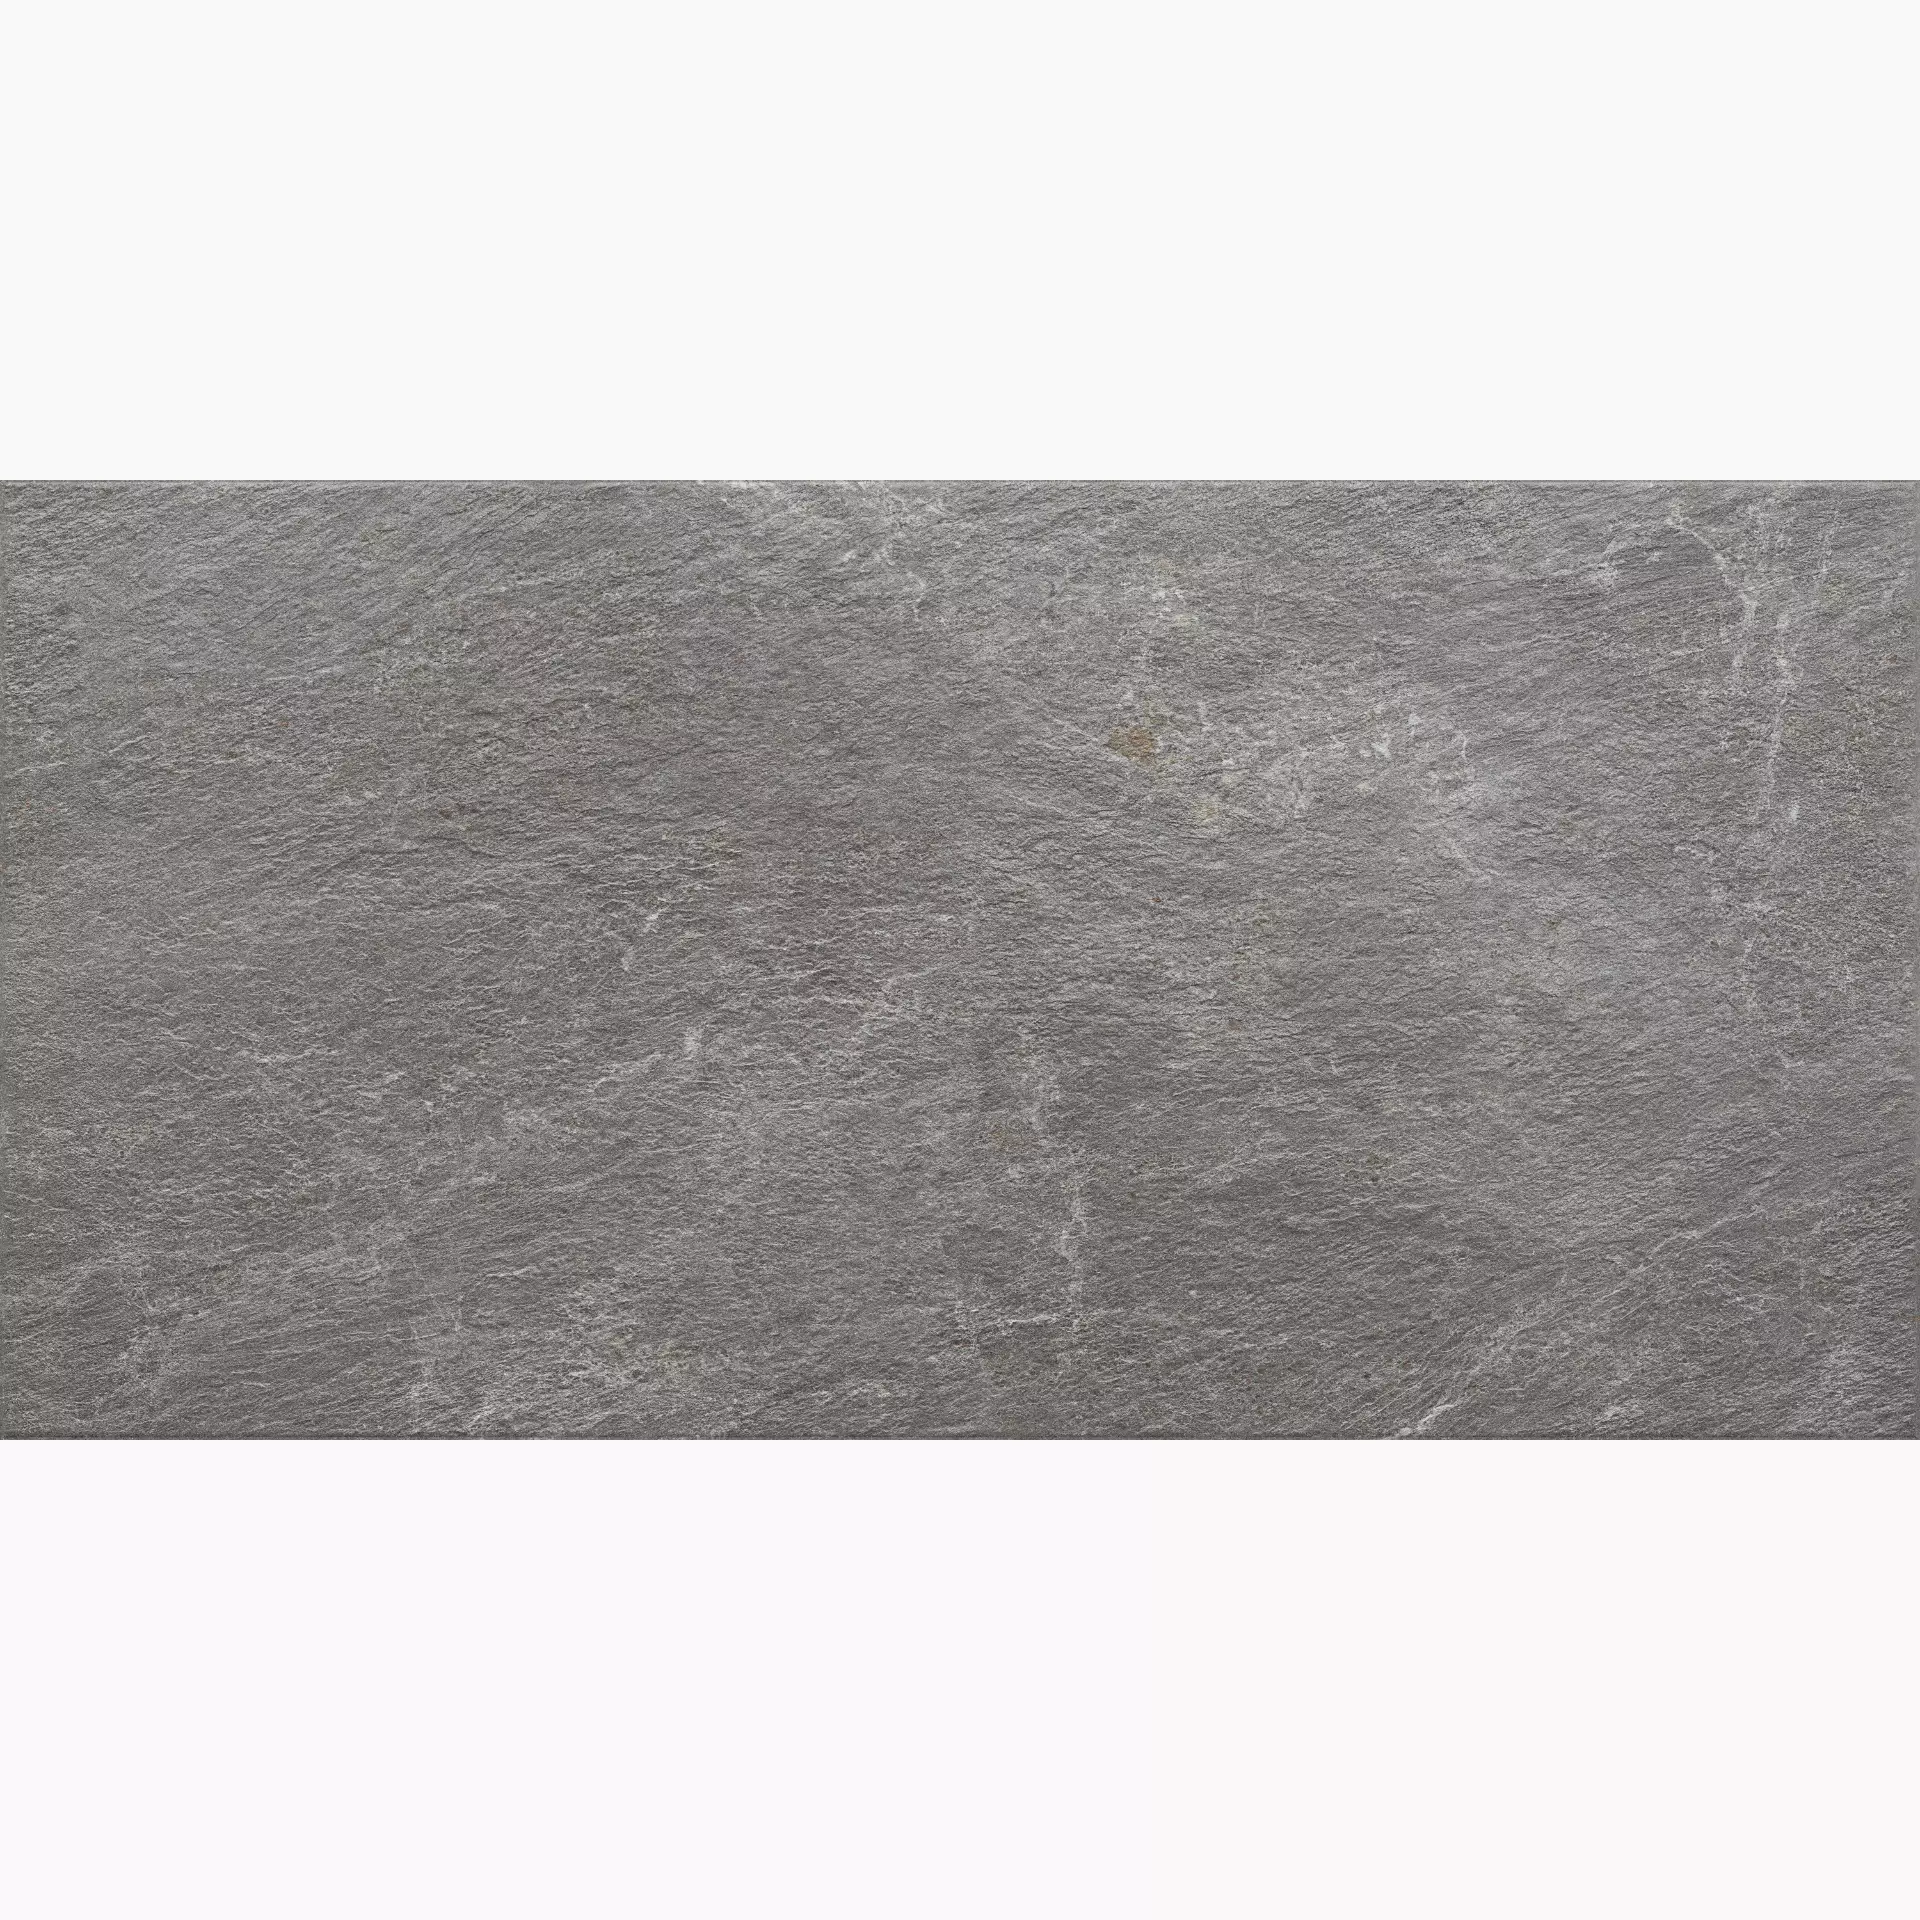 Panaria The Place Suburb Grey Antibacterial - Strutturato PGXP970 60x120cm rectified 20mm